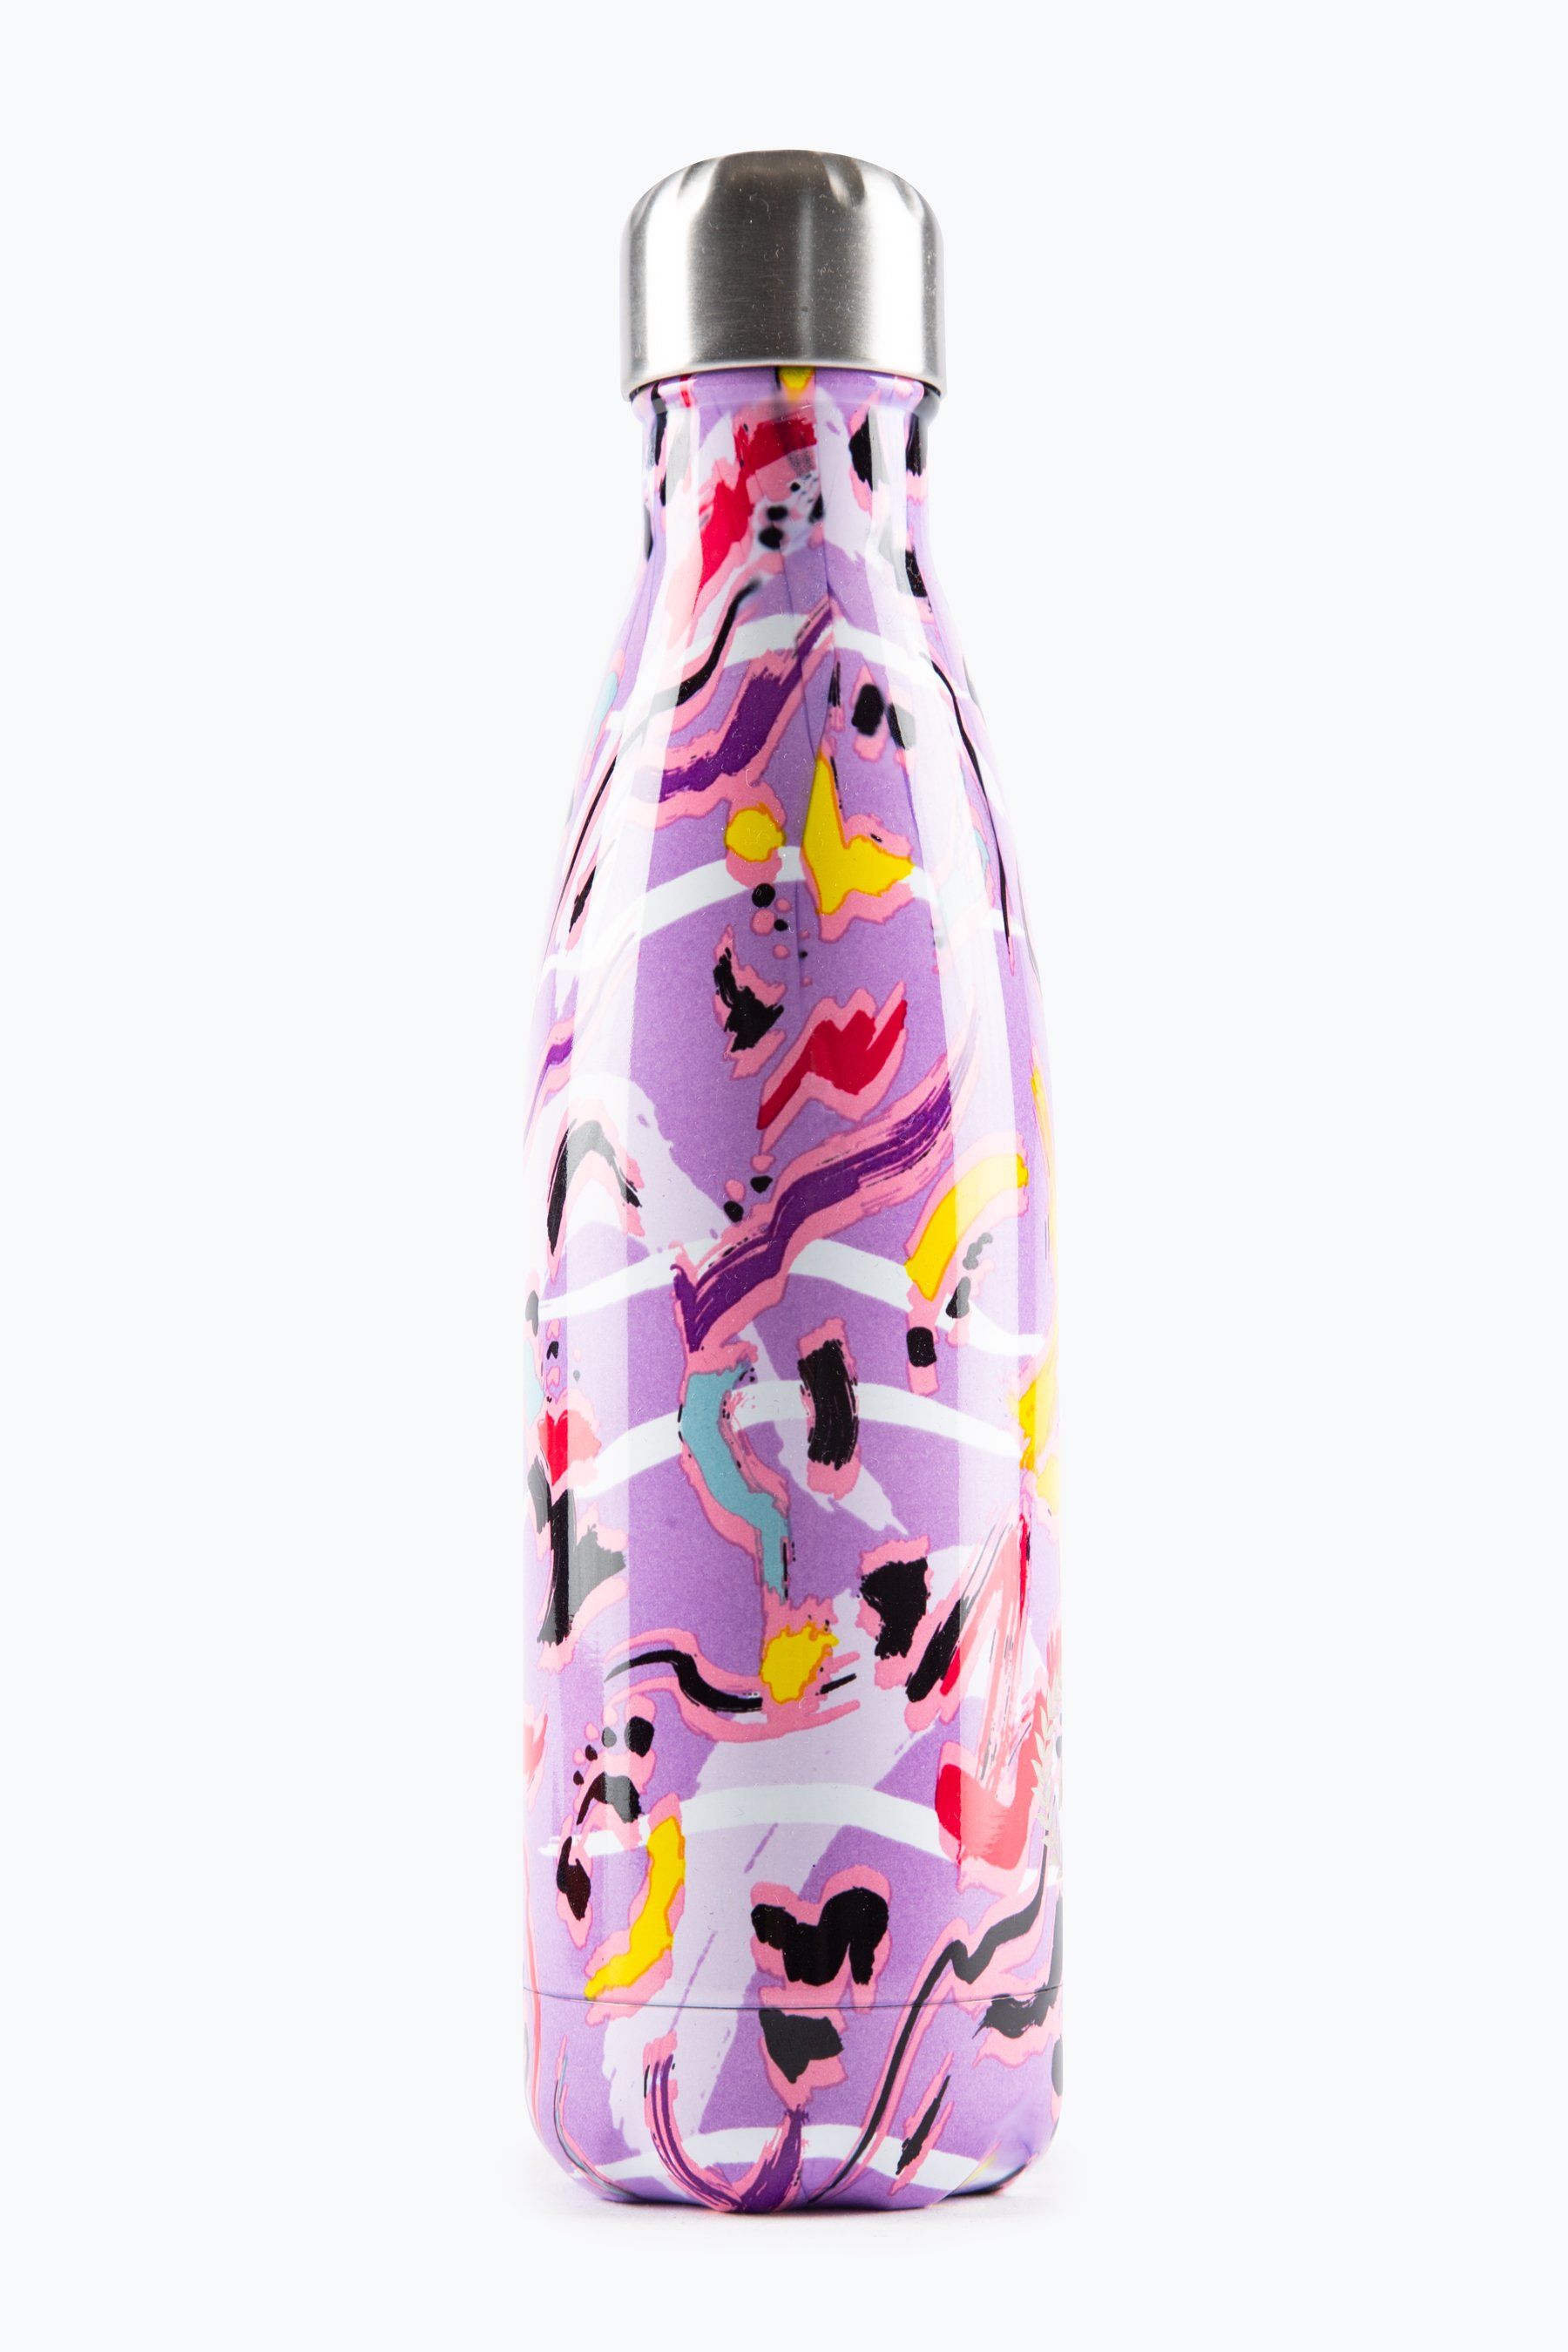 Keeping you hydrated, in style. Meet the HYPE. Abstract Animal Metal Reusable Water Bottle, perfect for when you're on the go. The design features a paint-splat inspired effect in a pastel beige, blue and yellow. Designed in Aluminium to ensure your water stays ice-cold and for chillier days, keeping your oat milk latte warm for longer. Reuse it again and again with an airtight screw lid prevents spills. With an all-over leopard animal skin inspired print with an abstract overlay in a pastel pink, purple and contrasting cyan colour palette. Why not grab one of our lunch bags or backpacks with a bottle holder to complete the look. Hand wash only.